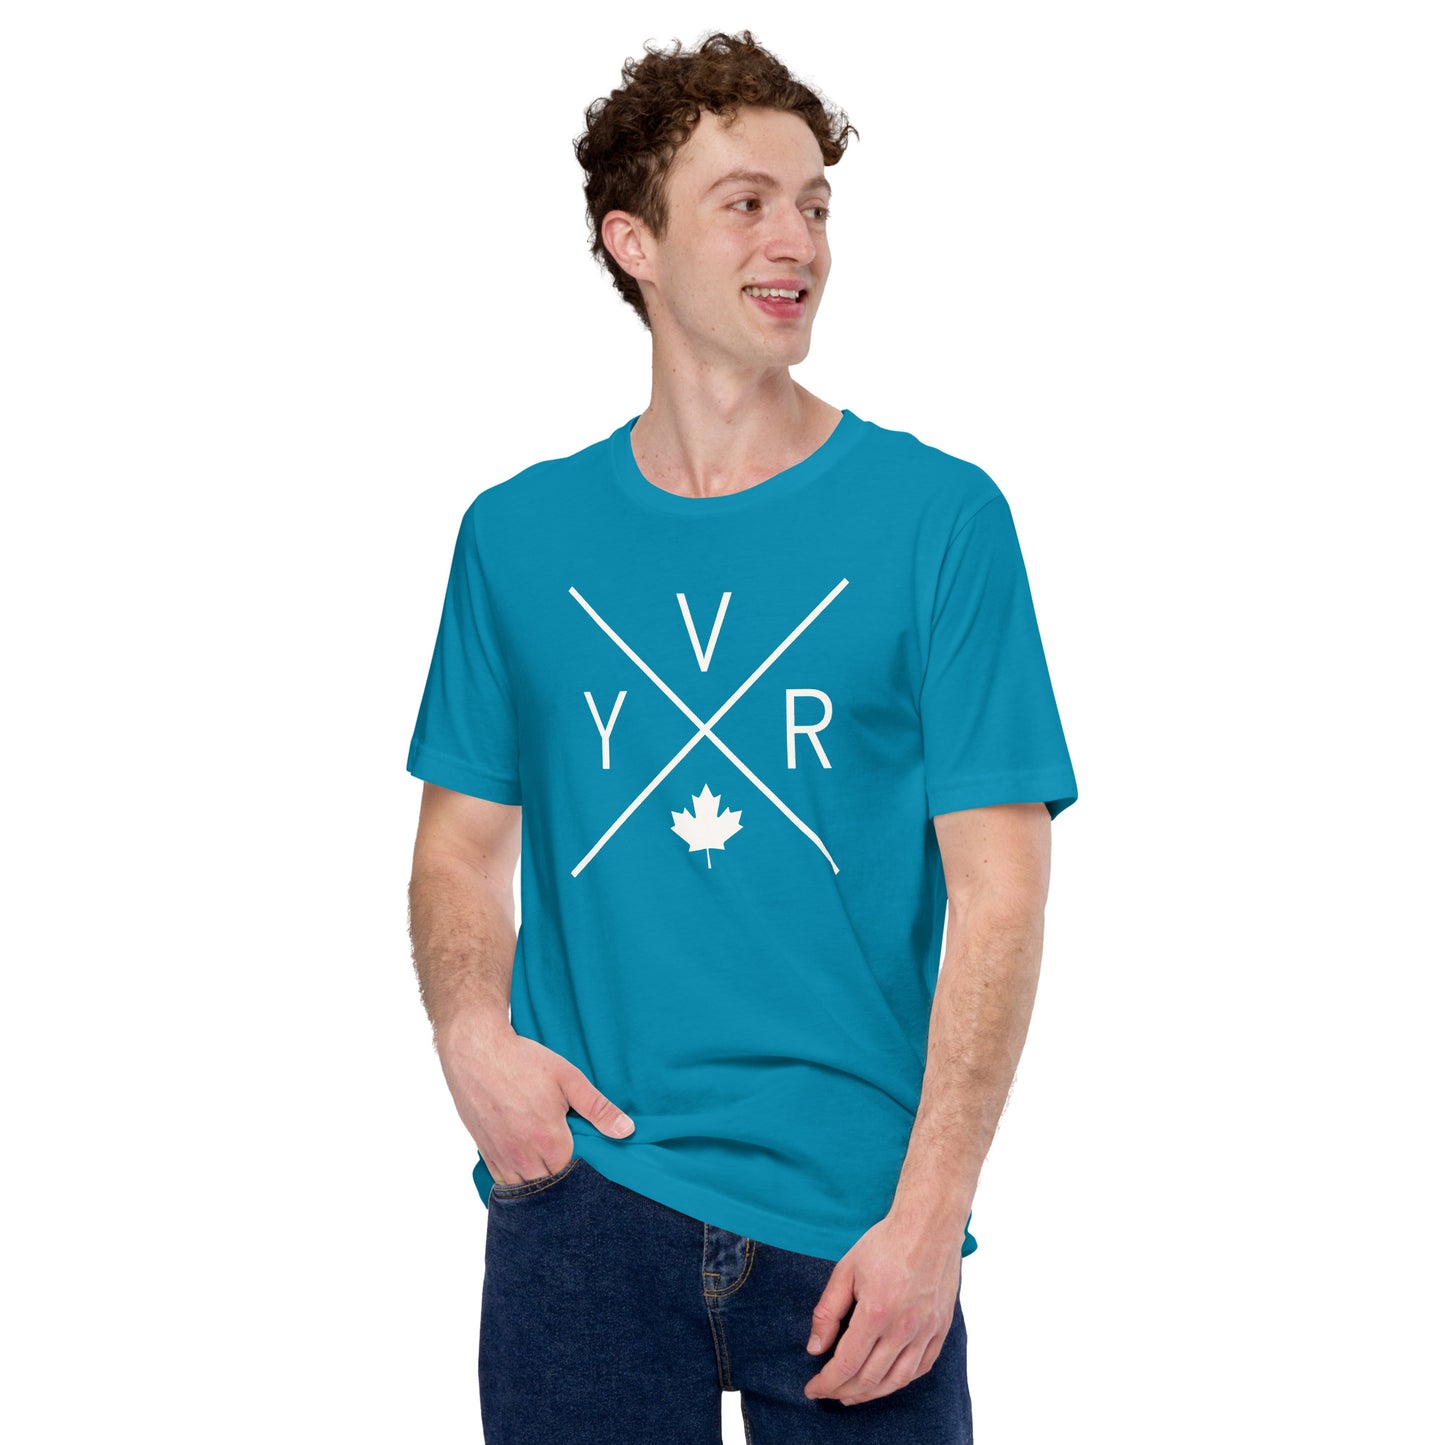 Crossed-X T-Shirt - White Graphic • YVR Vancouver • YHM Designs - Image 11